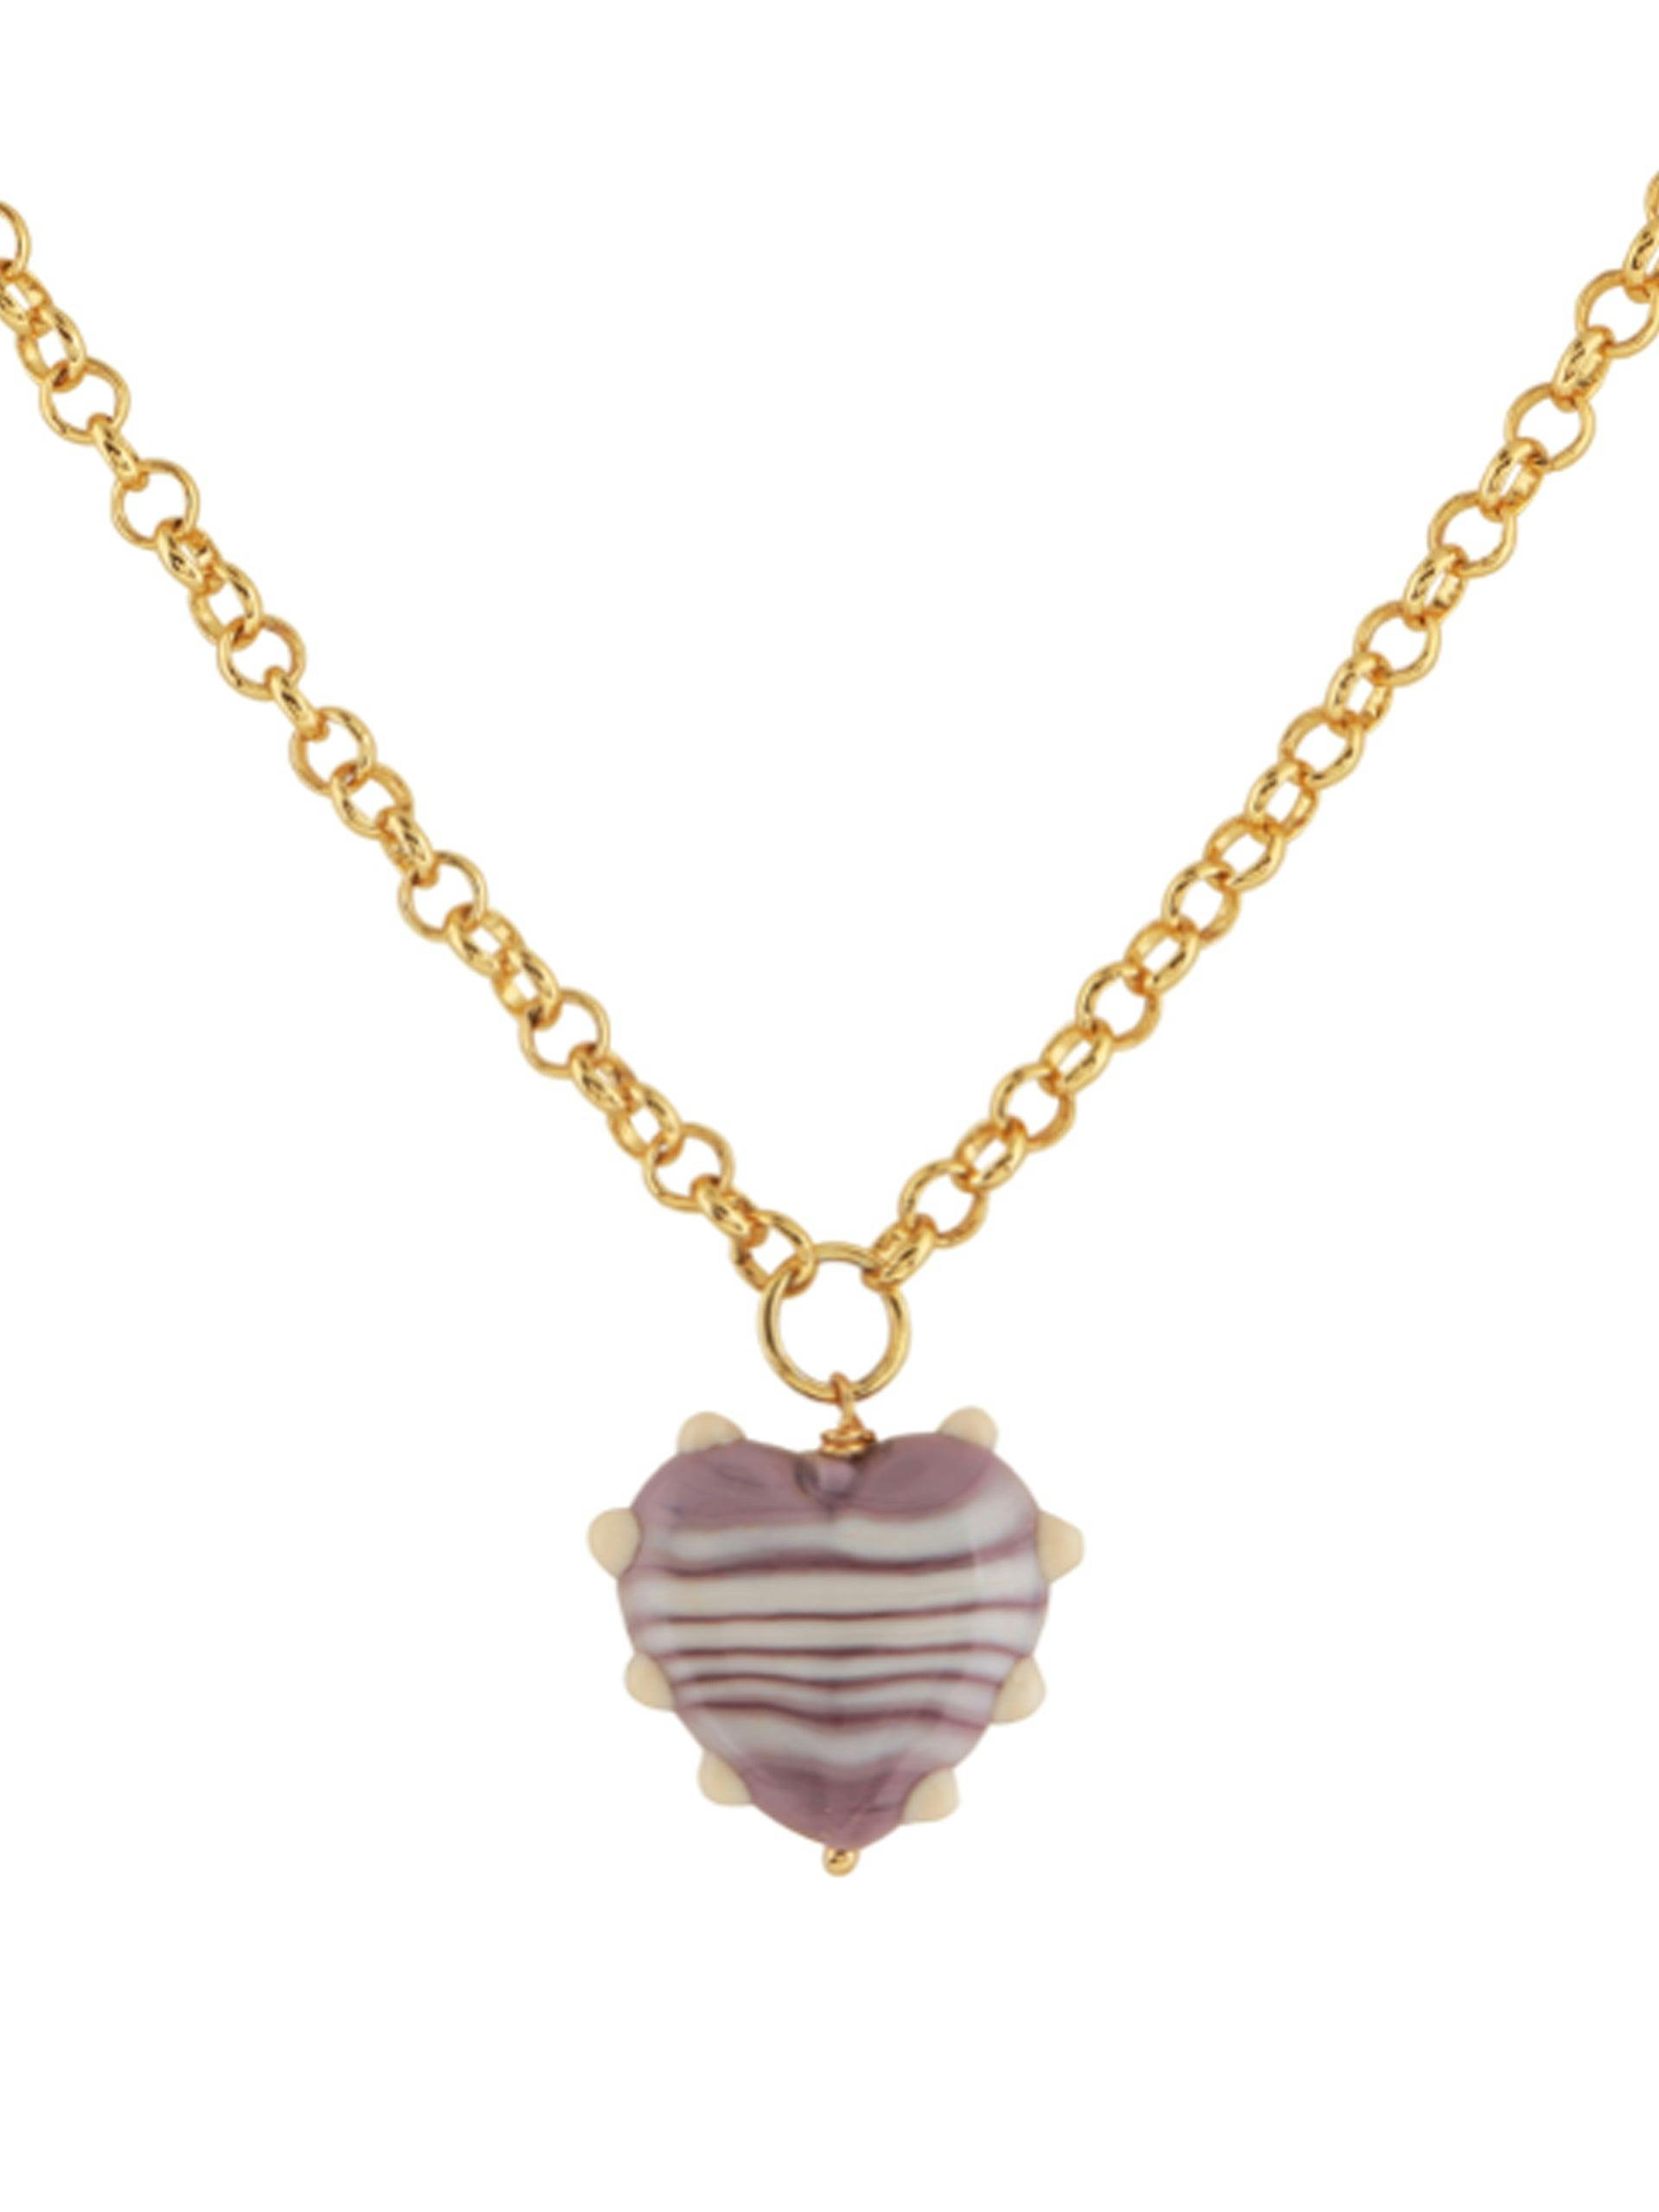 Extra-large purple and ivory Milagros Heart and belcher chain necklace